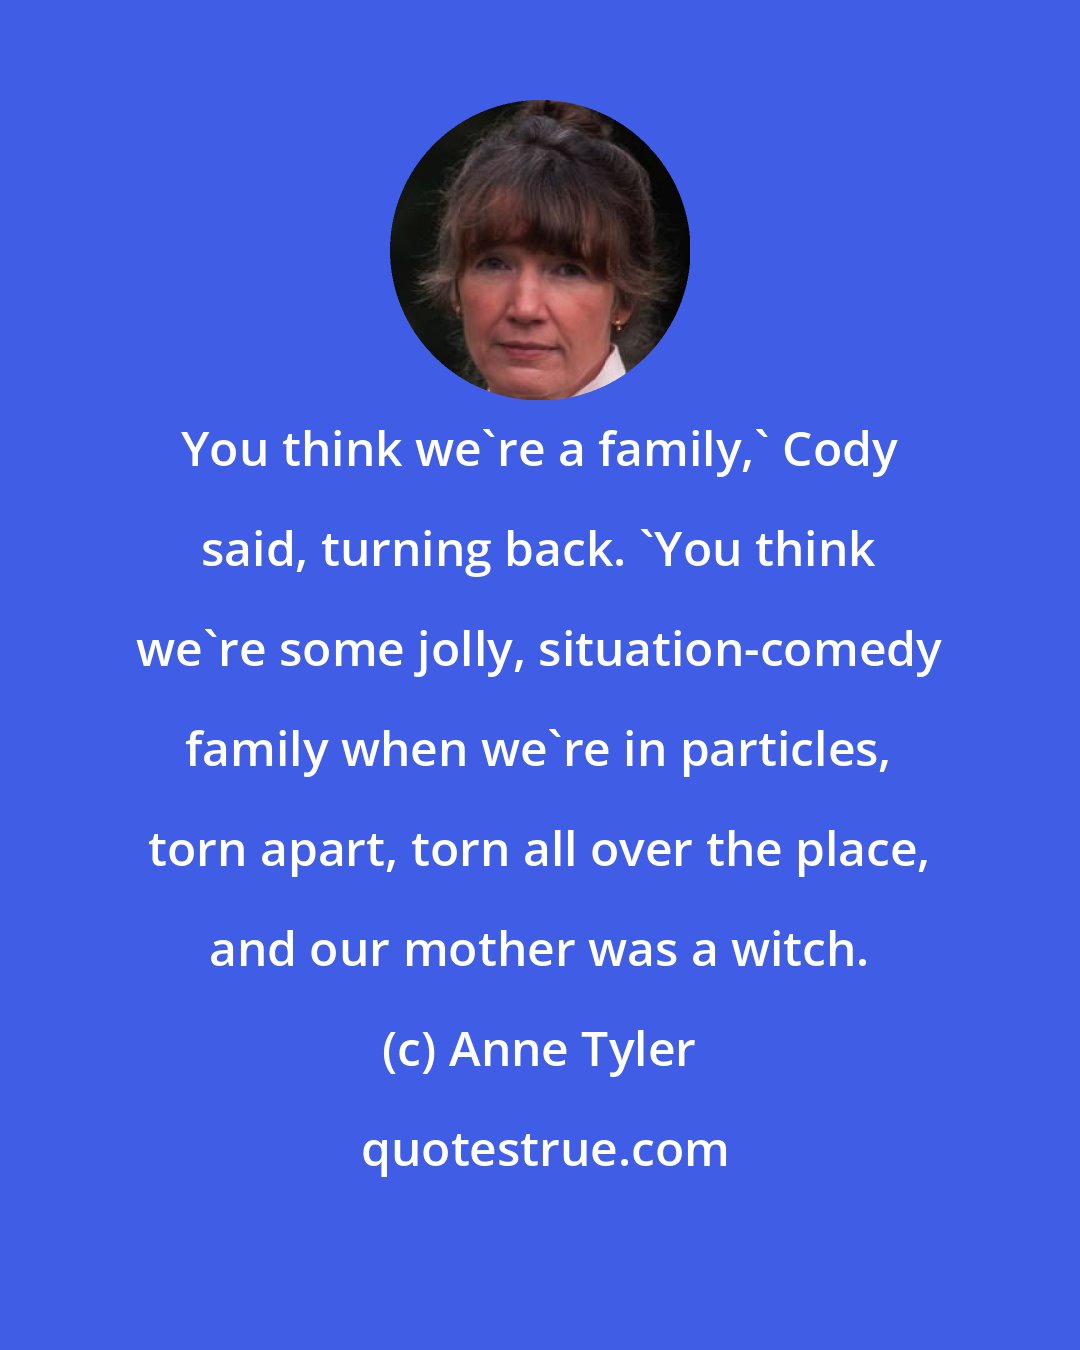 Anne Tyler: You think we're a family,' Cody said, turning back. 'You think we're some jolly, situation-comedy family when we're in particles, torn apart, torn all over the place, and our mother was a witch.